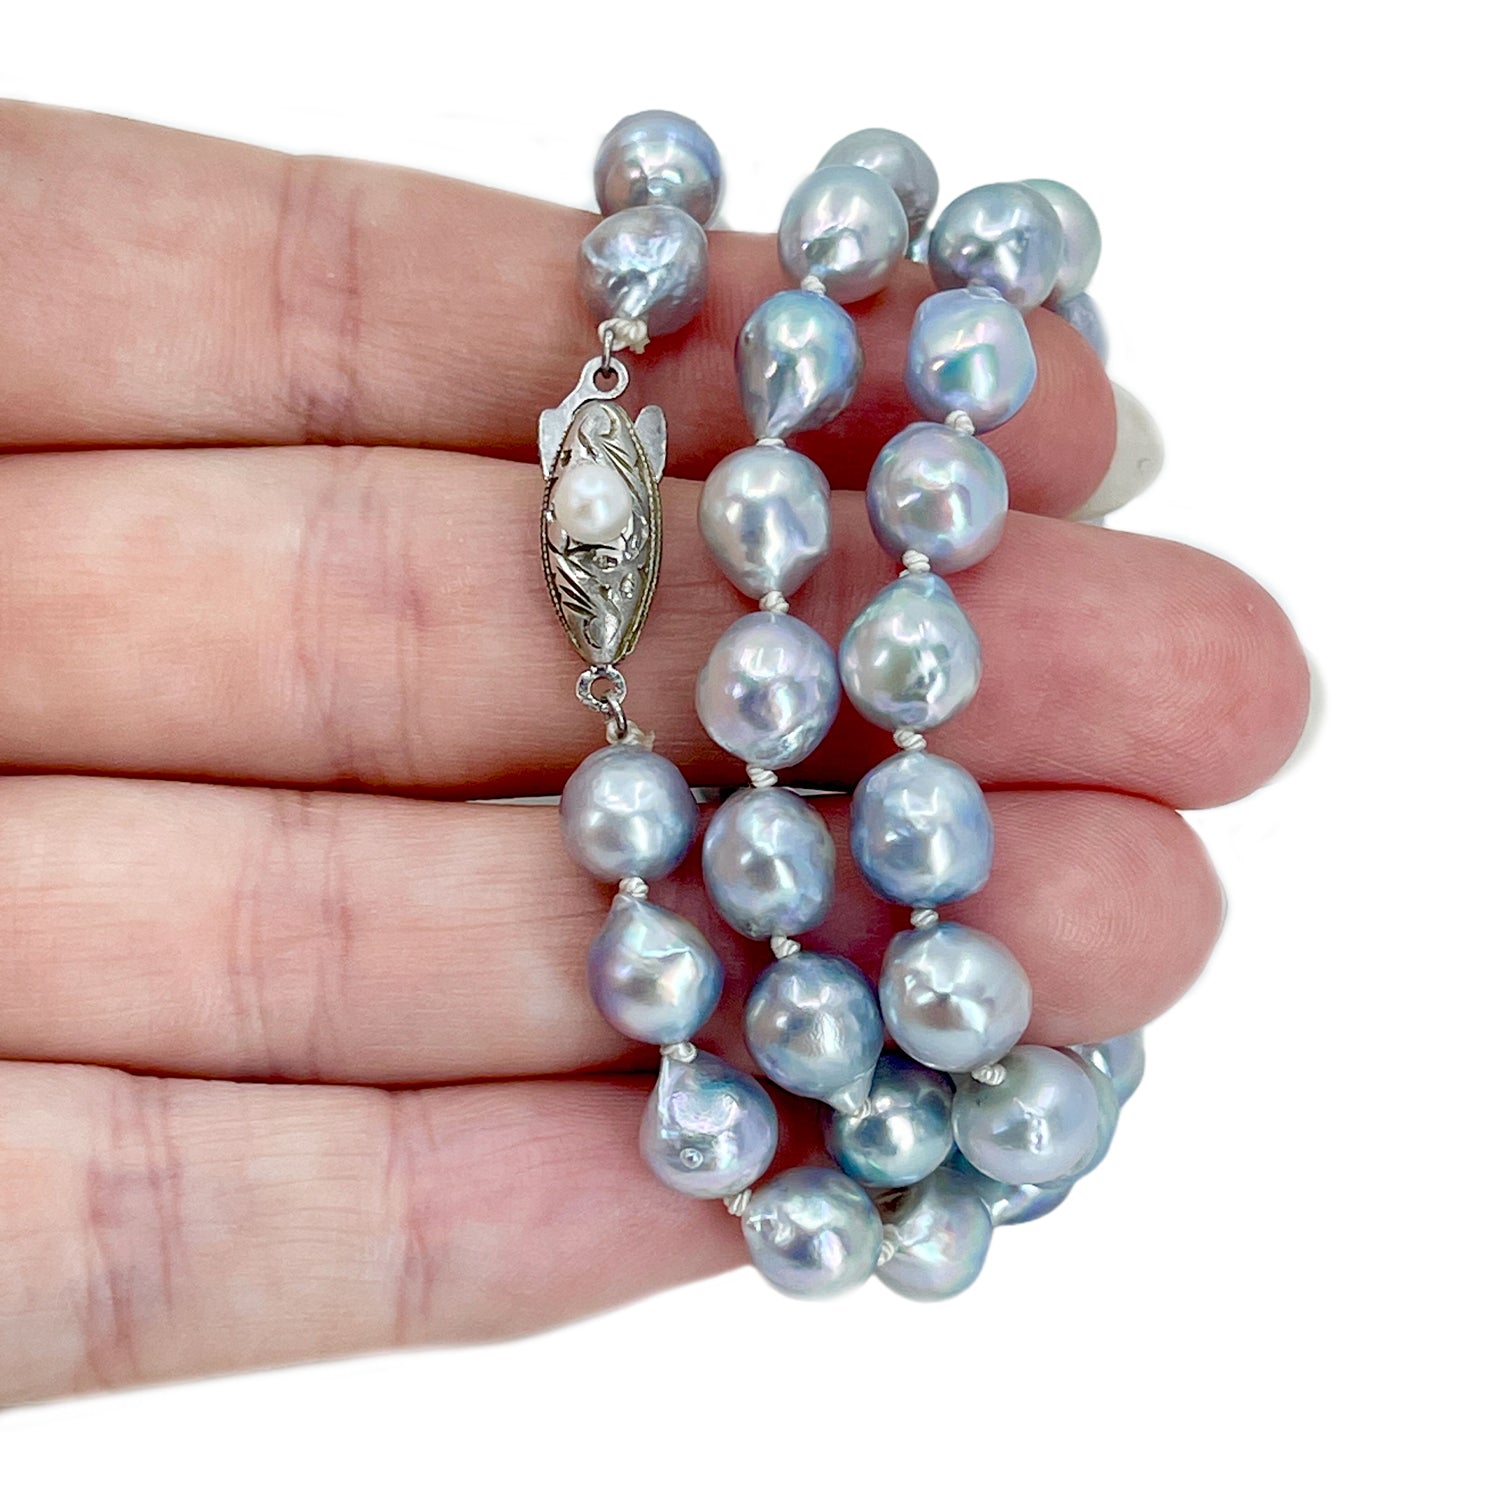 Baroque Blue Vintage Mid Century Japanese Saltwater Cultured Akoya Pearl Necklace - Silver 17 Inch